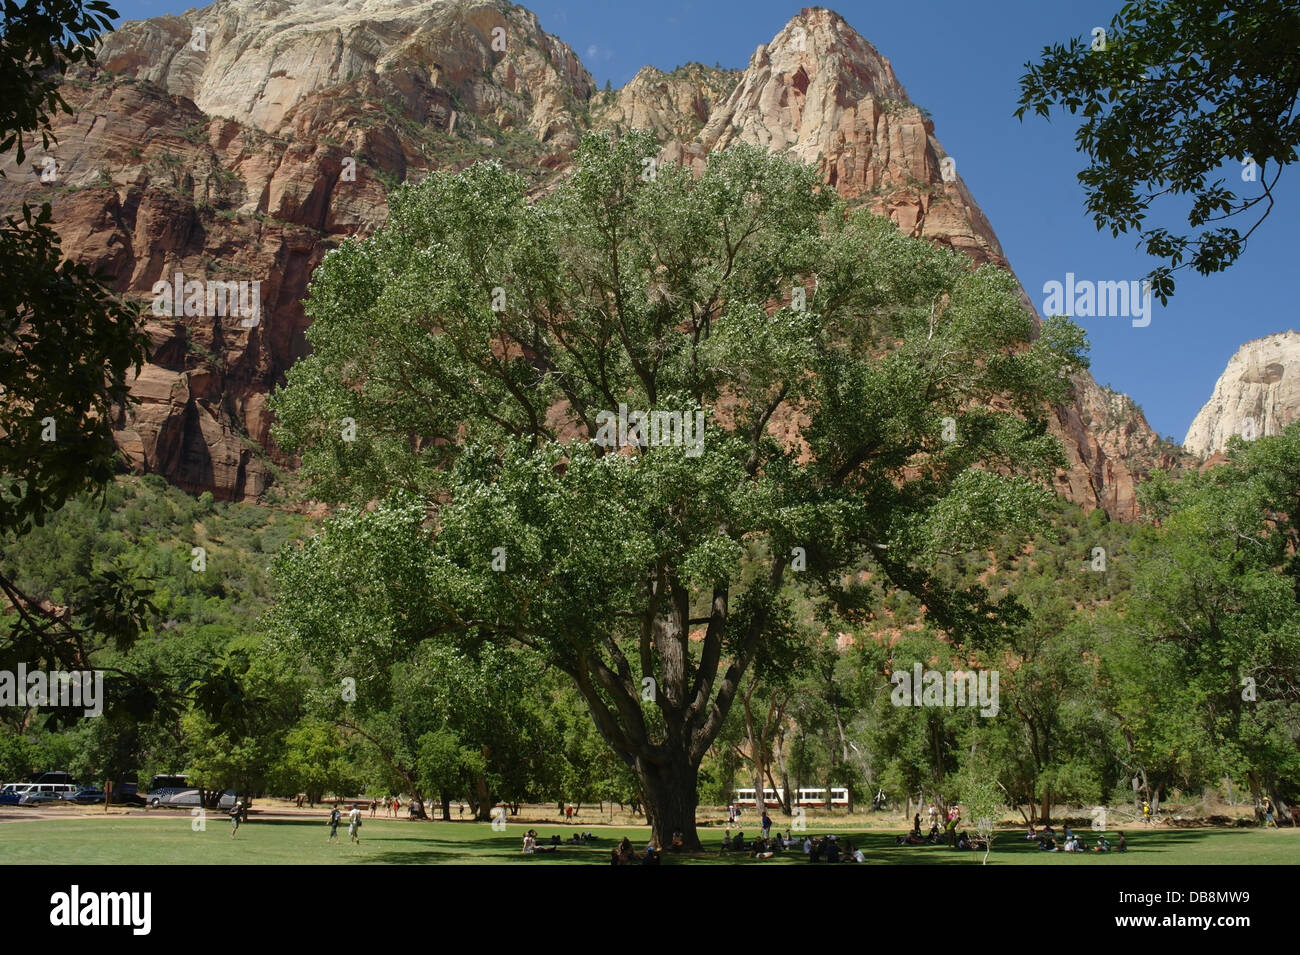 Blue sky view, towards Lady Mountain, people relaxing green park grass below broad crown tree, Zion Canyon Lodge, Utah Stock Photo